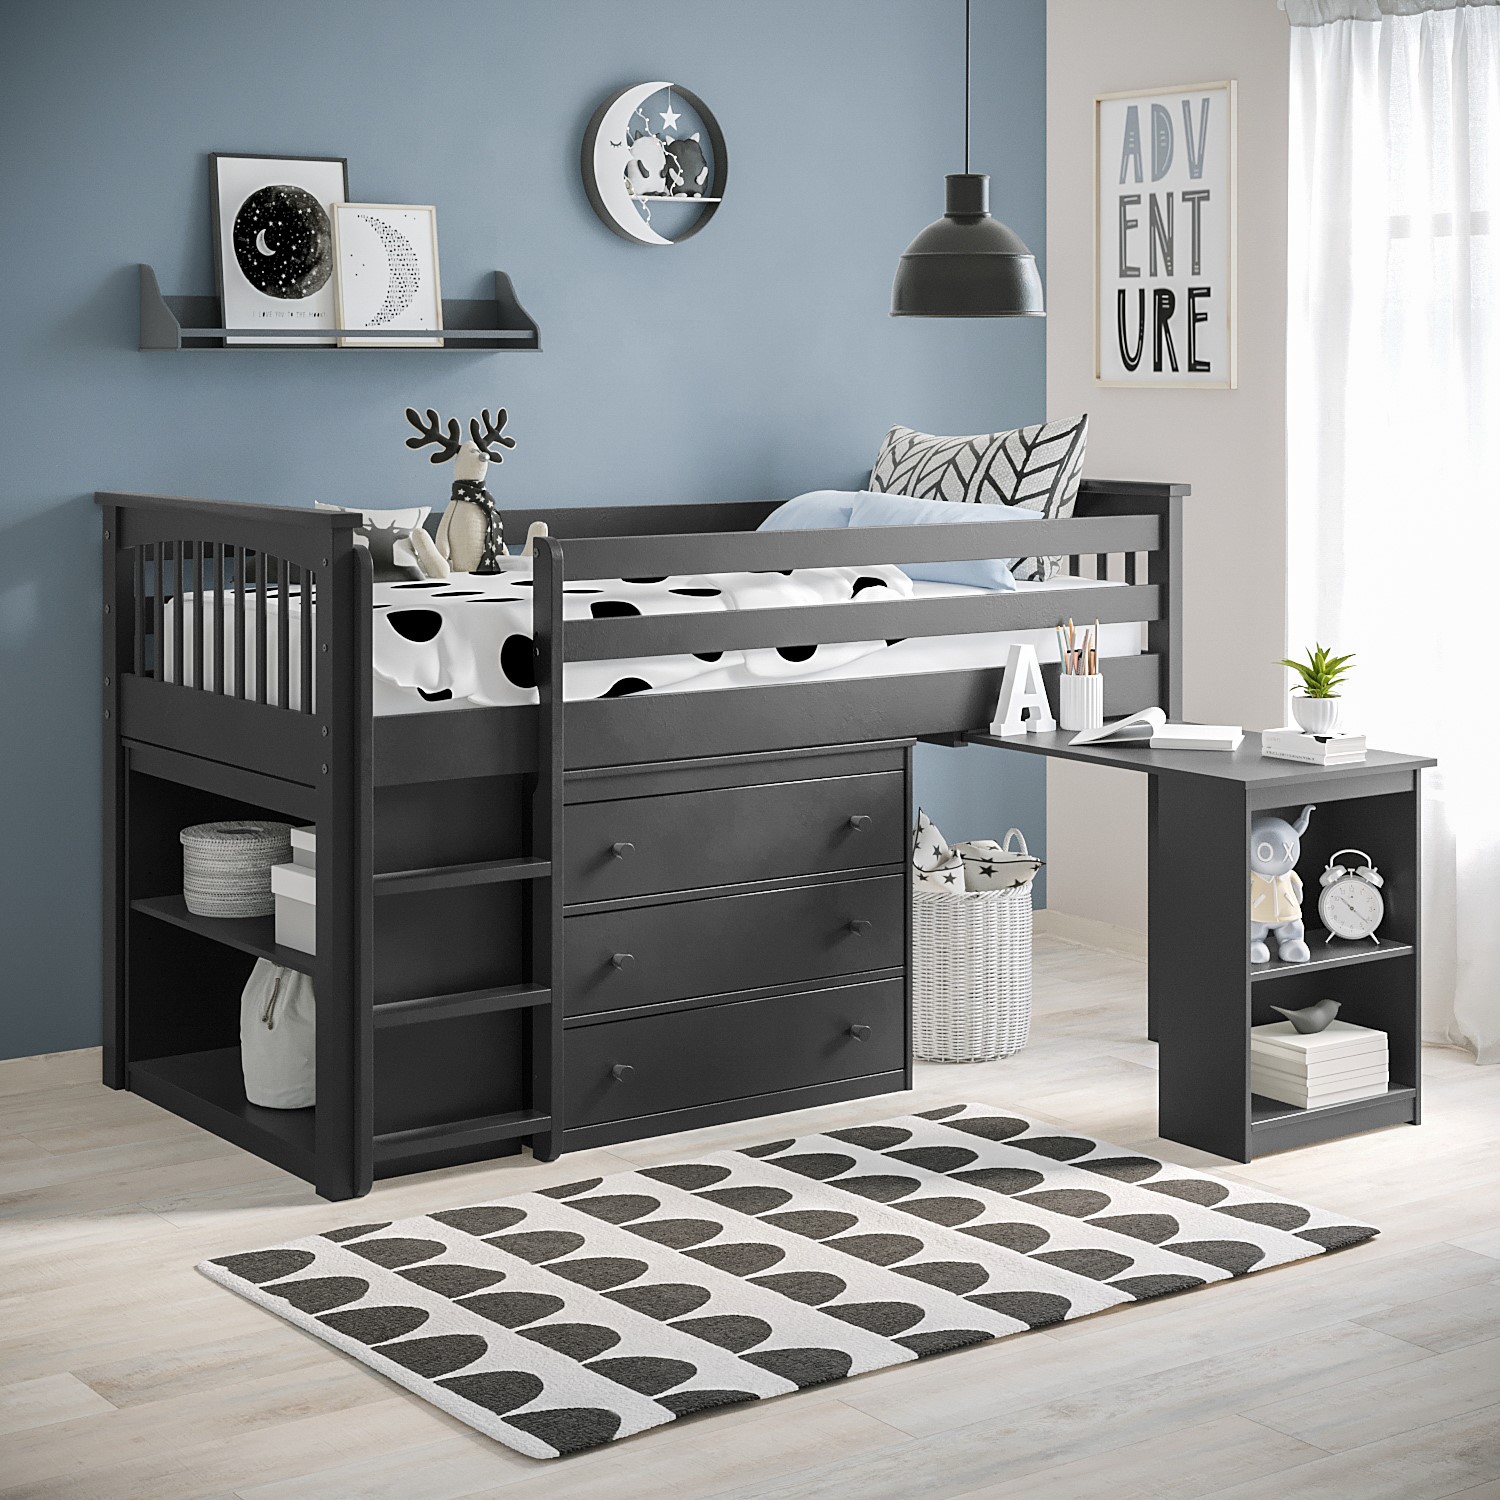 Grey Wooden Mid Sleeper Bed with Desk and Storage - Windermere